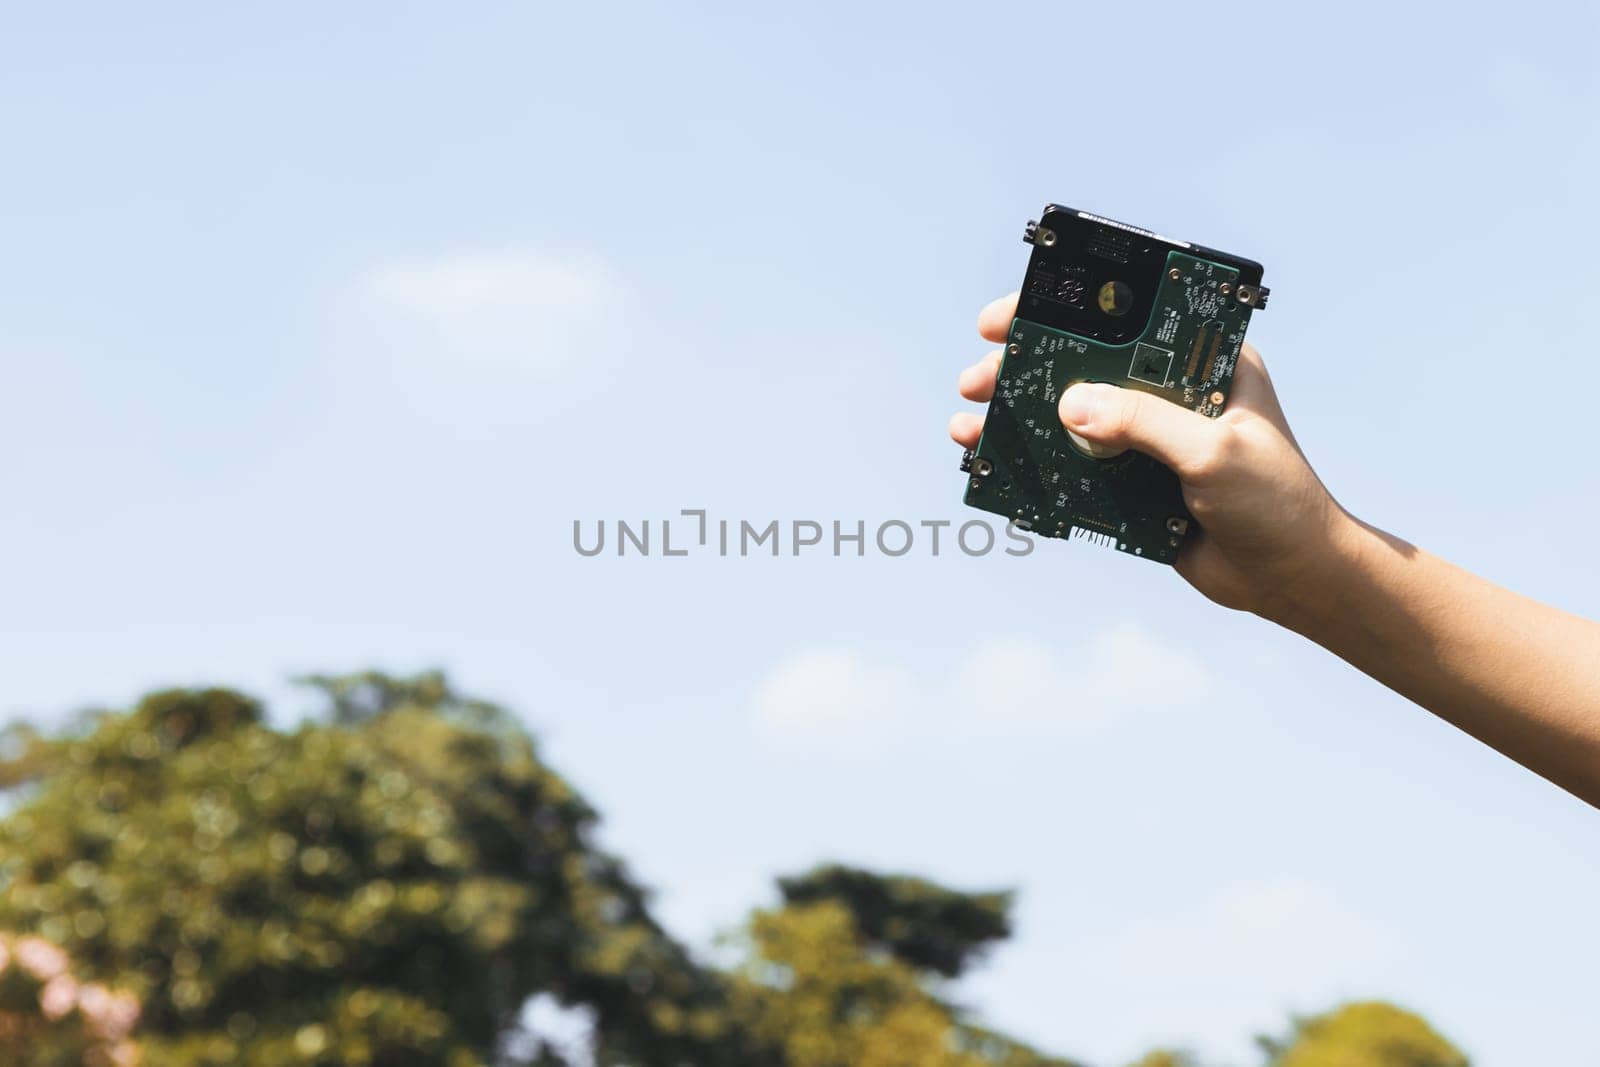 Recyclable electric waste held in hand up on sky background. Hand holding electronic trash for recycle reduce and reuse concept to promote clean environment with recycling management. Gyre